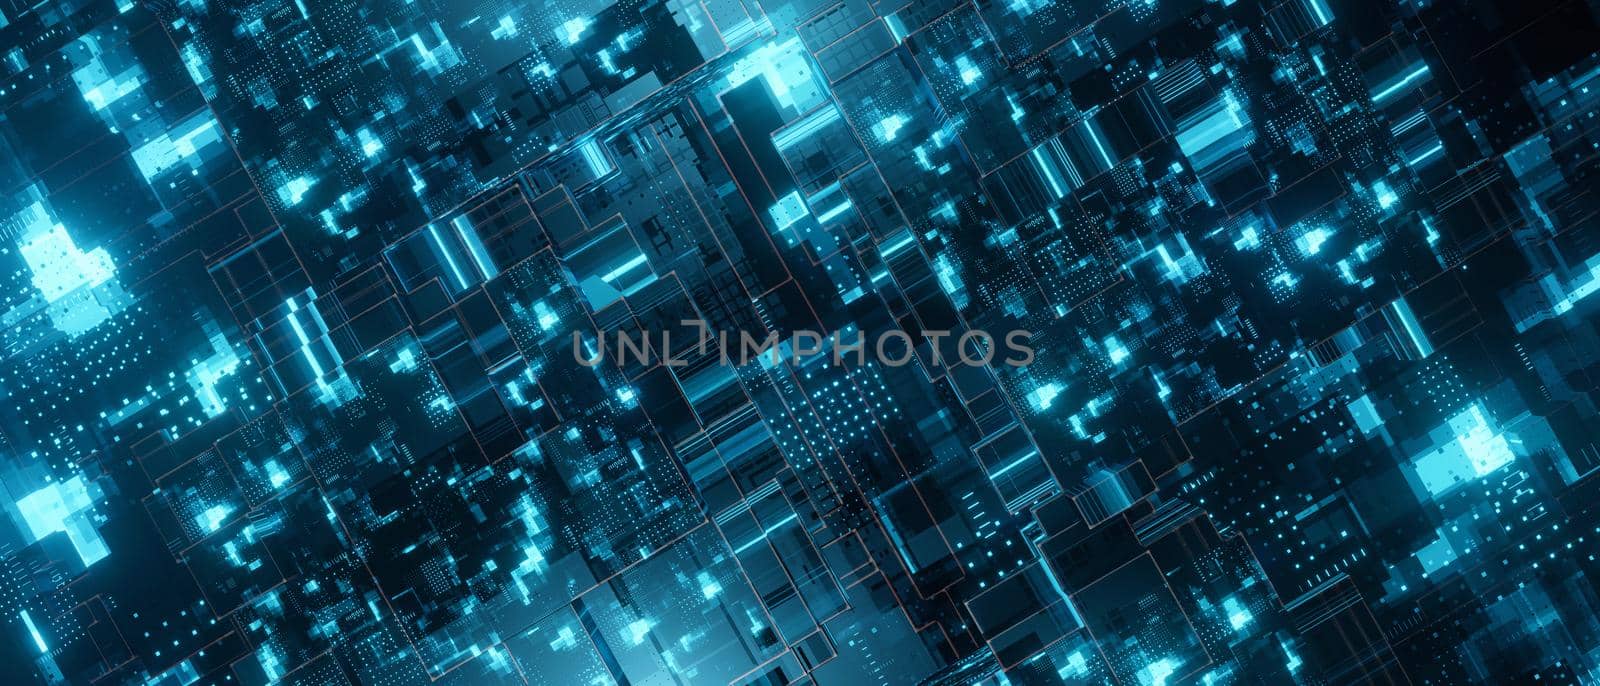 Abstract Shiny Futuristic Electronics Processor Or Large Scale PCB Circuit Like Pattern Surface Board Digital Light Blue Turquoise Banner Background Concepts 3D Illustration